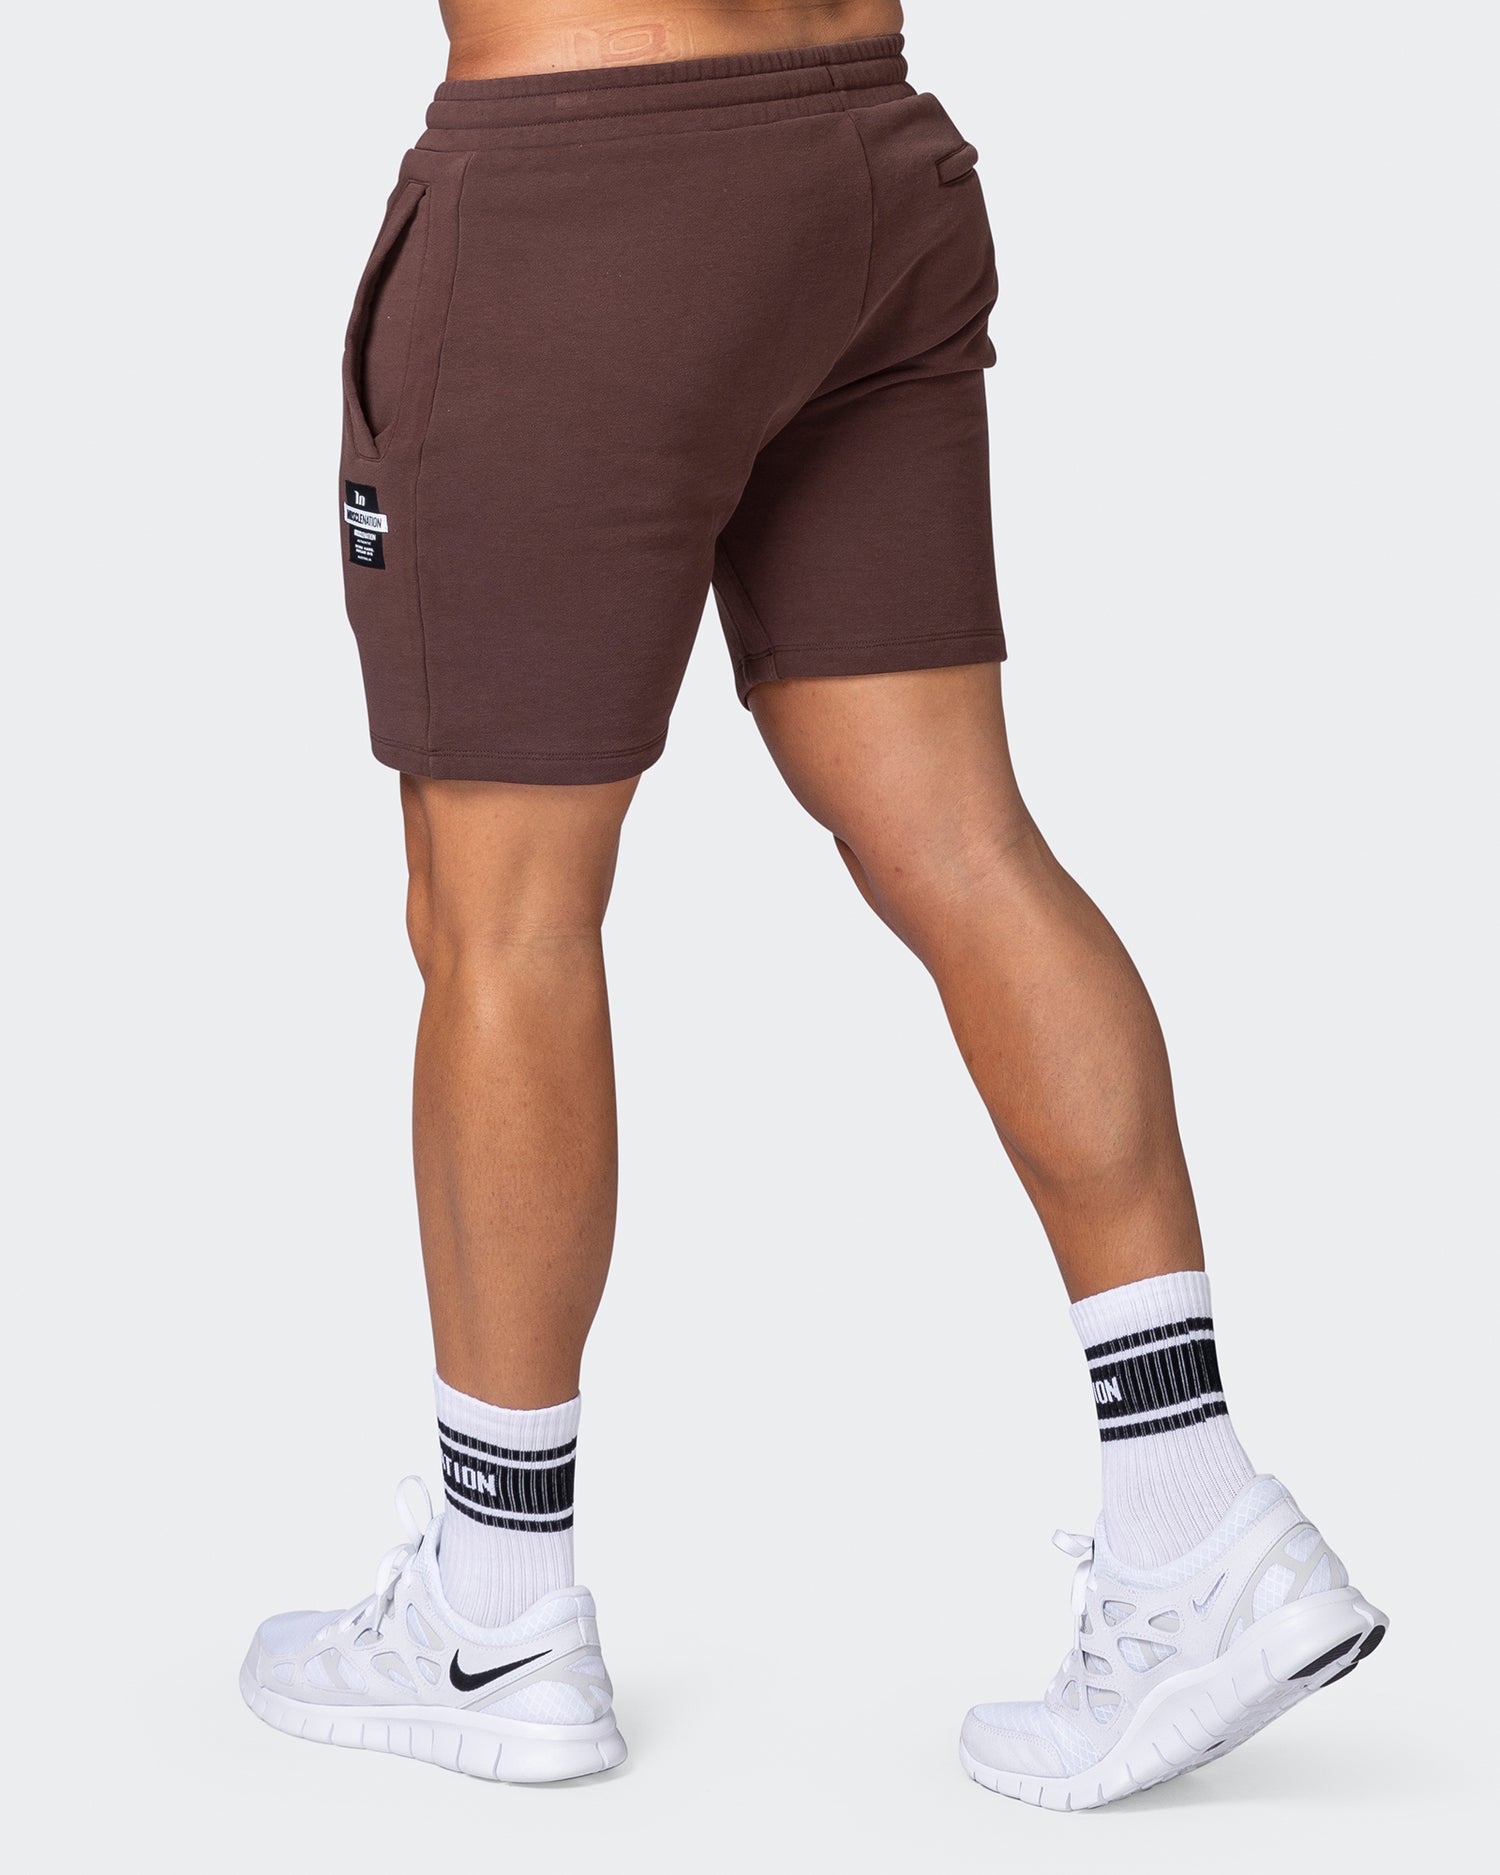 Infinite Vintage Shorts - Washed Coffee